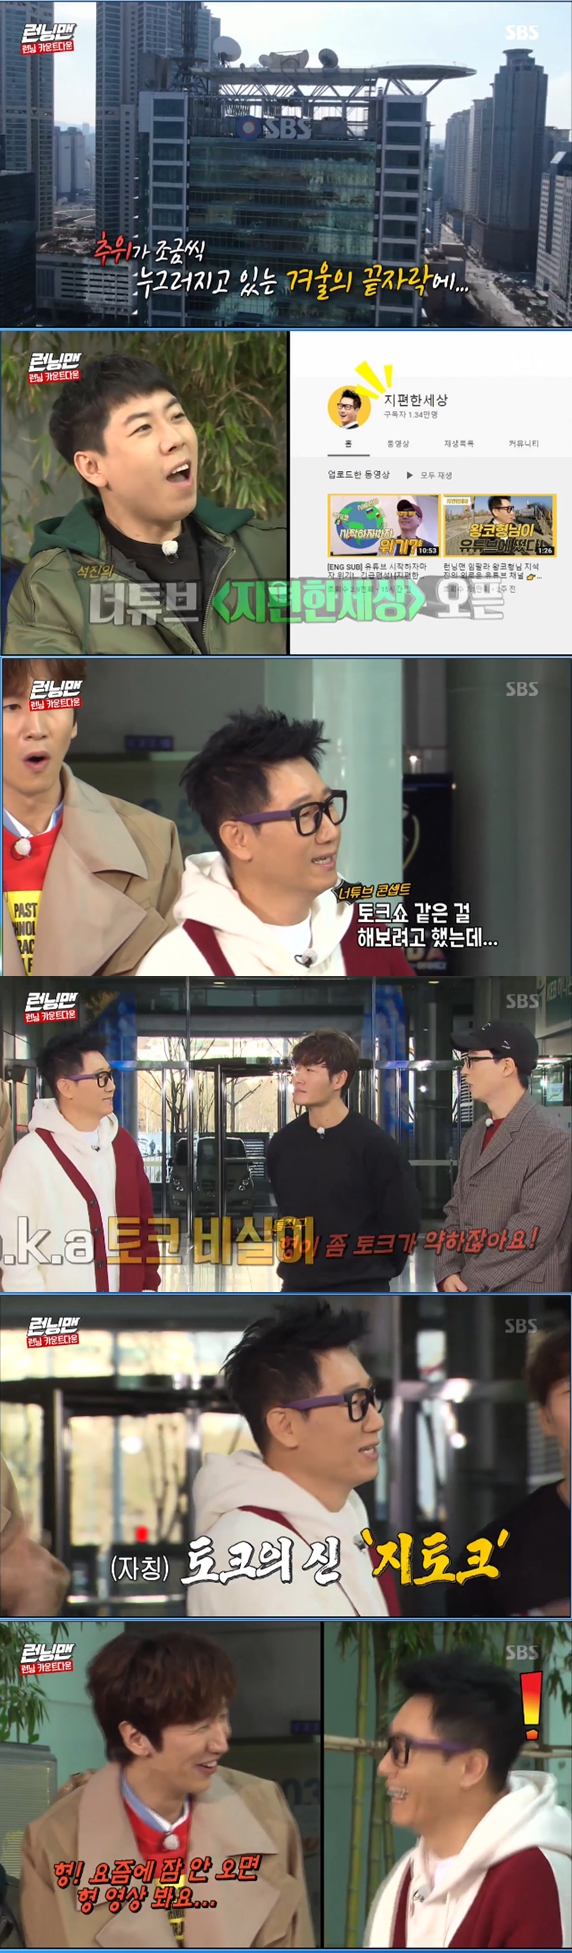 Yoo Jae-Suk has a vitriolic blow to Ji Suk-jin.On SBS entertainment program Running Man broadcasted on the night of the 16th, Ji Suk-jin, who opened a new talk YouTube channel,) the members of the group.Yoo Jae-Suk mentioned the fact that Ji Suk-jin opened the YouTube channel in the opening.Ji Suk-jin was ashamed, saying, I told you not to mention that on the air.But Ji Suk-jin, unlike the horse, promoted his YouTube channel.I made my first recording, but it was so fun, he said, saying, Youtube centered on talk.Yoo Jae-Suk said, It is negative that my brother is doing a talk show. My brother is weak in talk.The program follows the title; you can only be comfortable, Yoo Jae-Suk said, referring to the YouTube channel name The Utterly World.